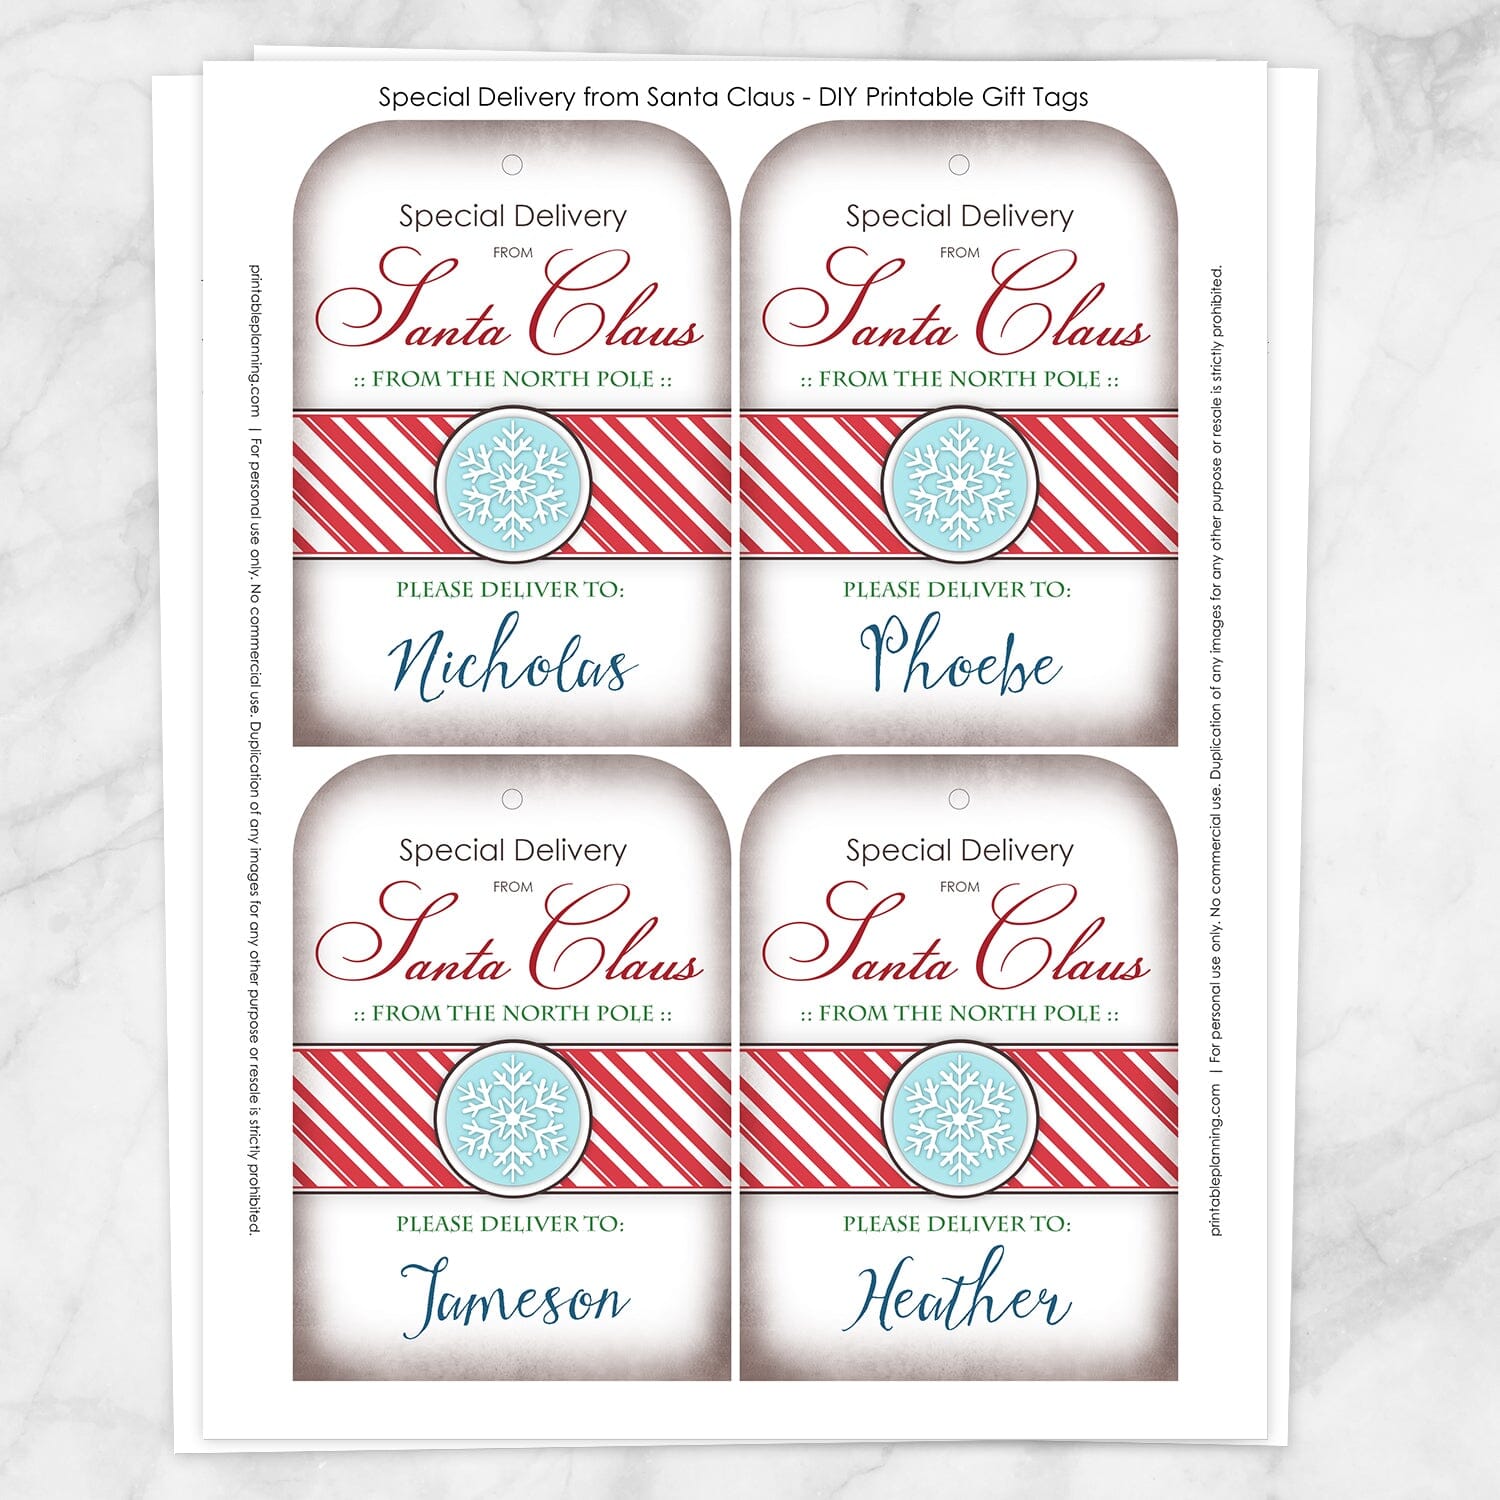 Printable Special Delivery from Santa Claus - Personalized Gift Tags at Printable Planning. Sheet of 4 gift tags.